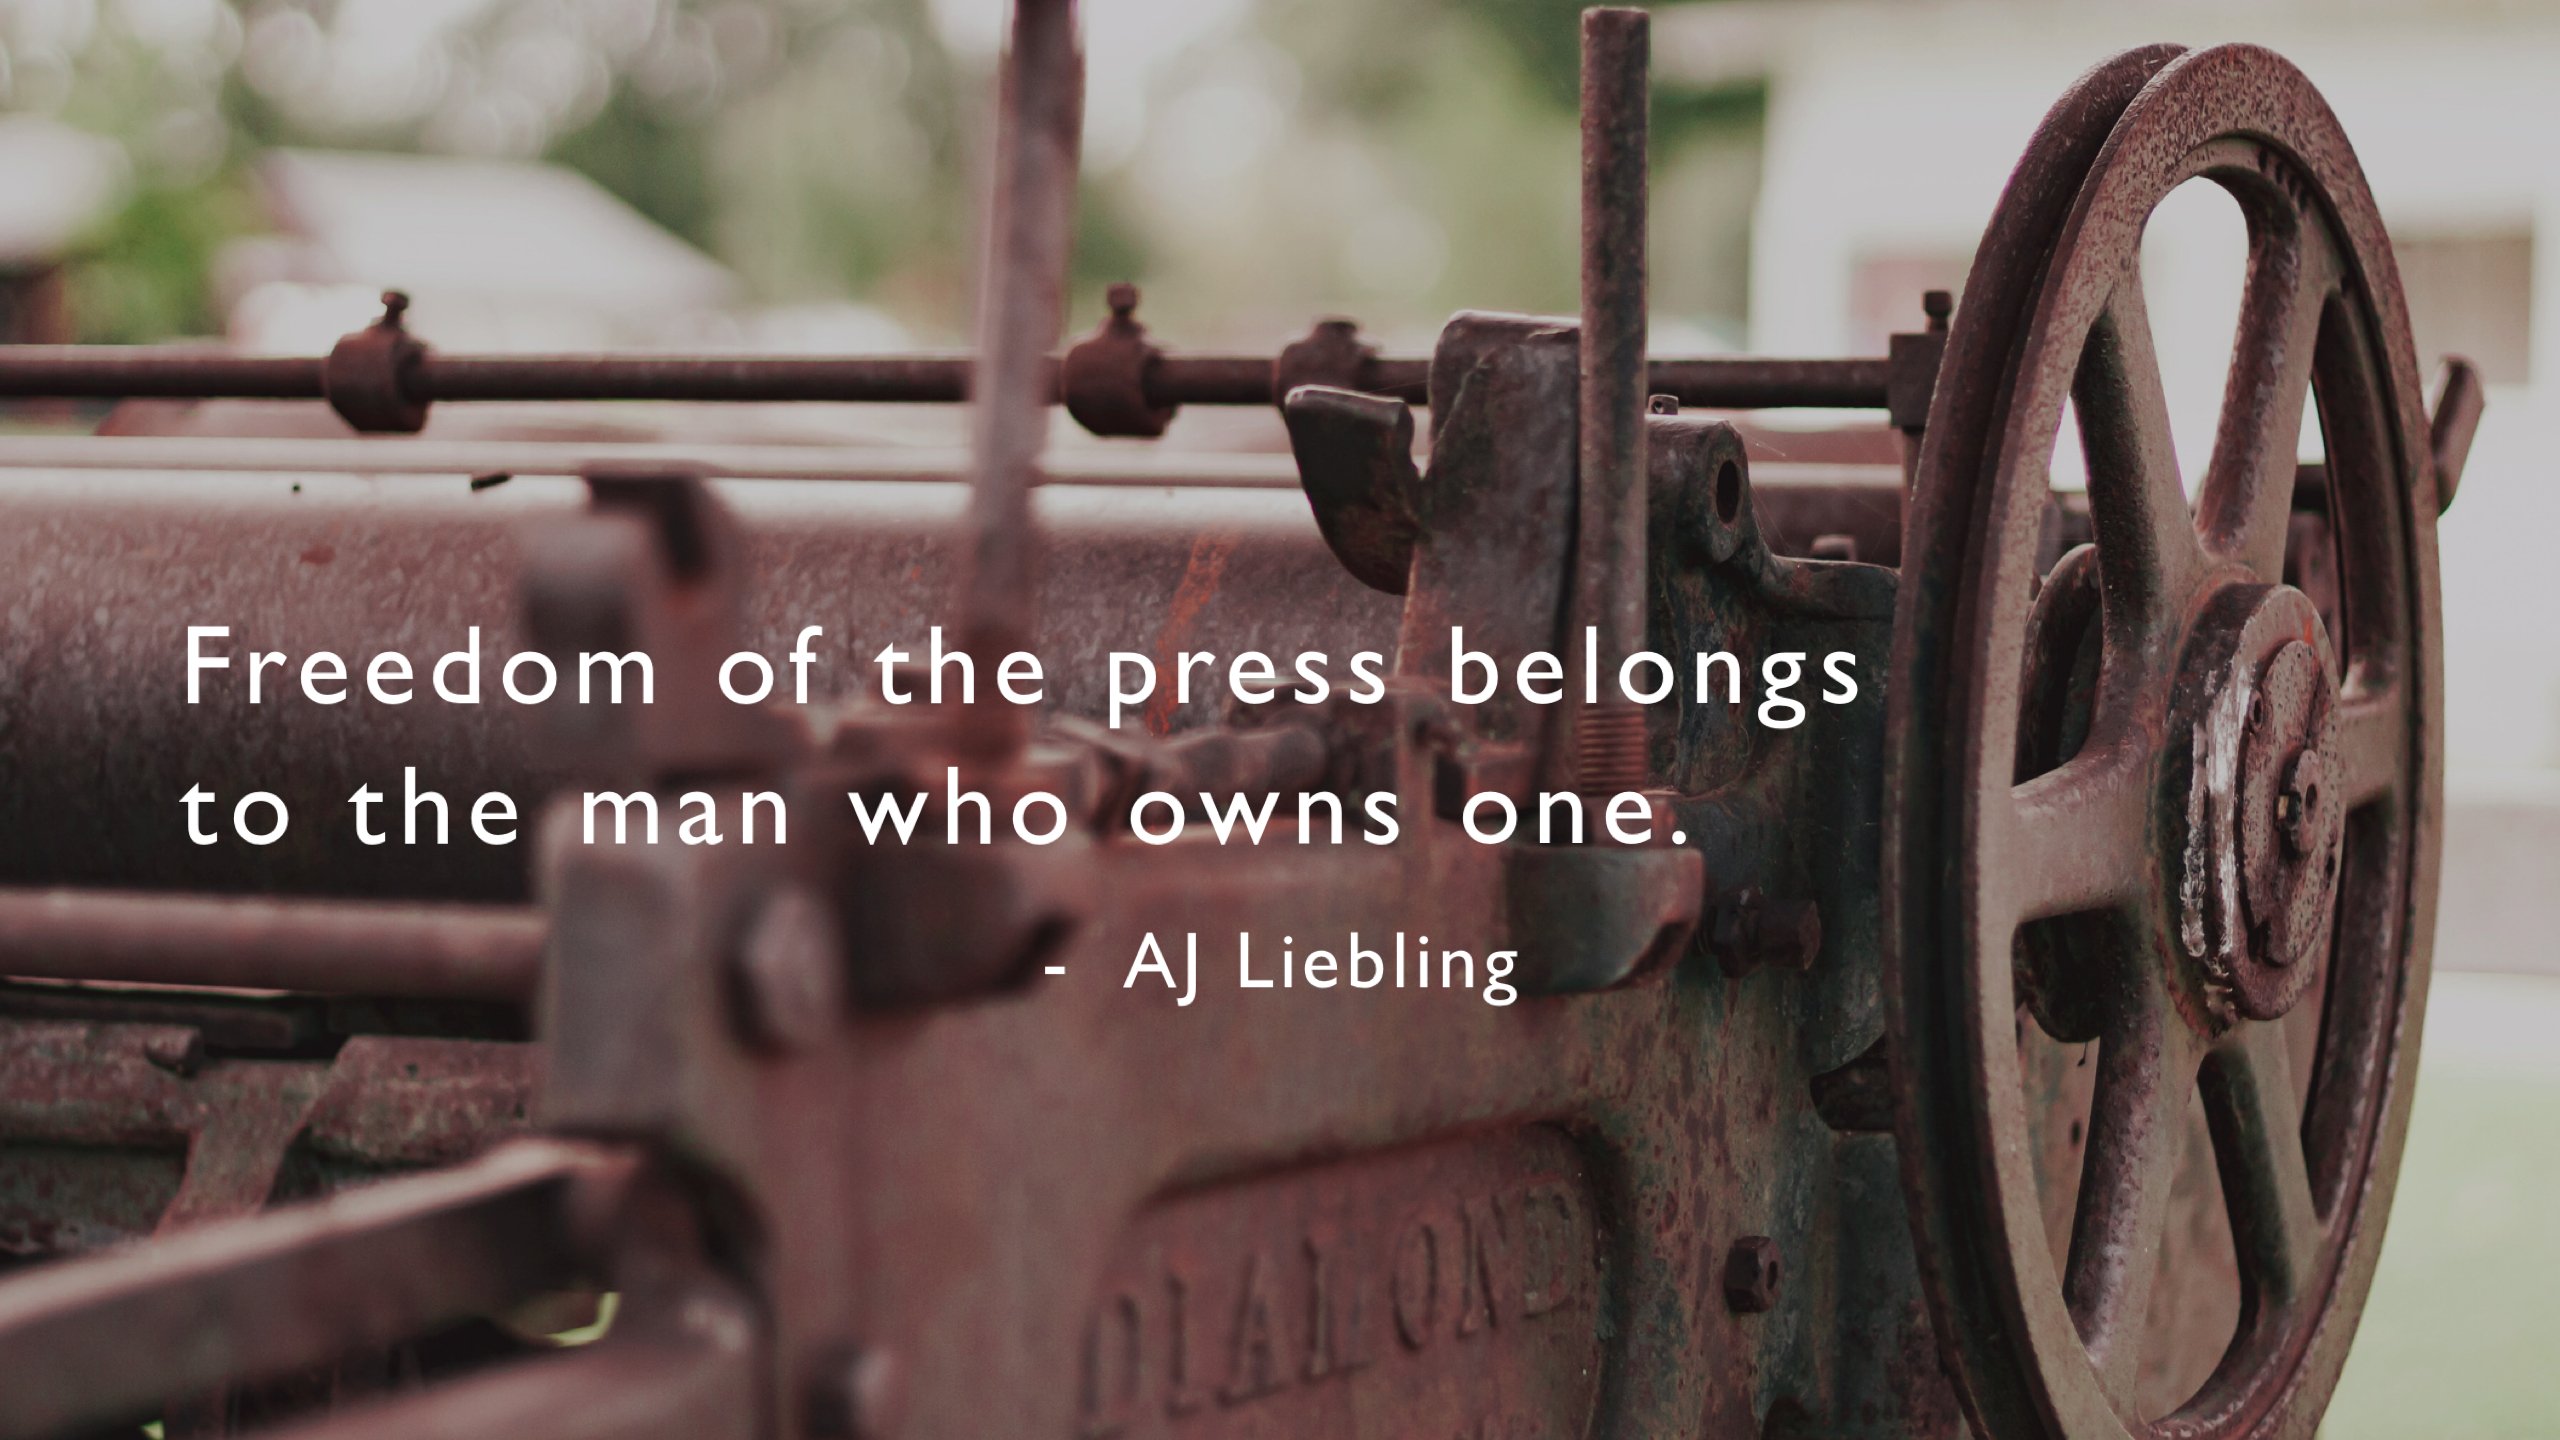 Old printing press, Freedom of the press belongs to the man who owns one. AJ Liebling